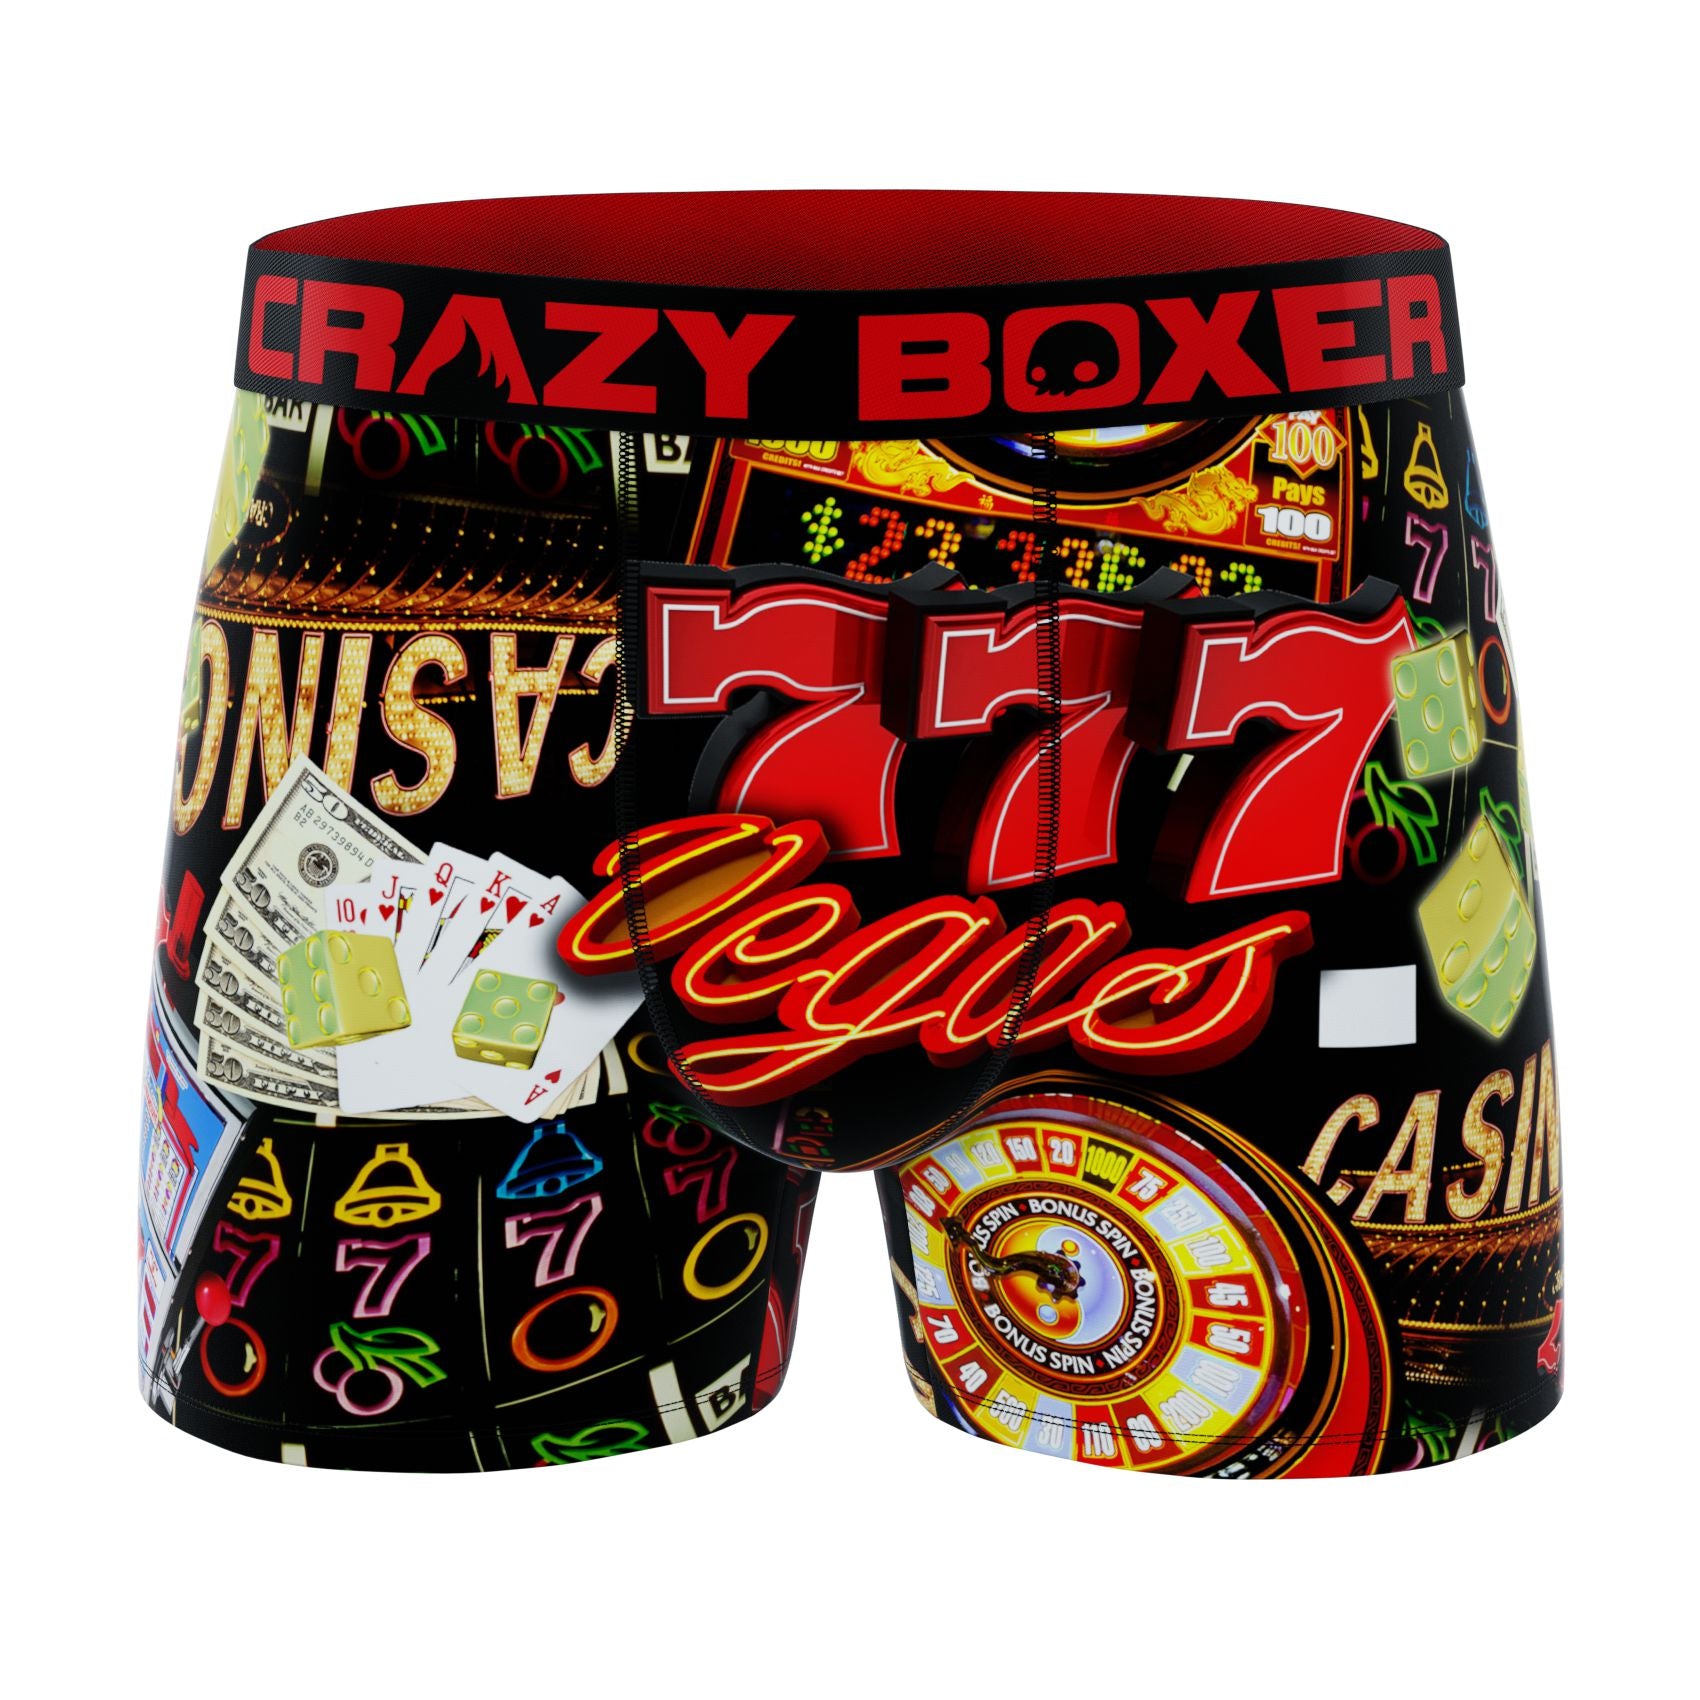 CRAZYBOXER Toy Story Woody Men's Boxer Briefs (3 pack)